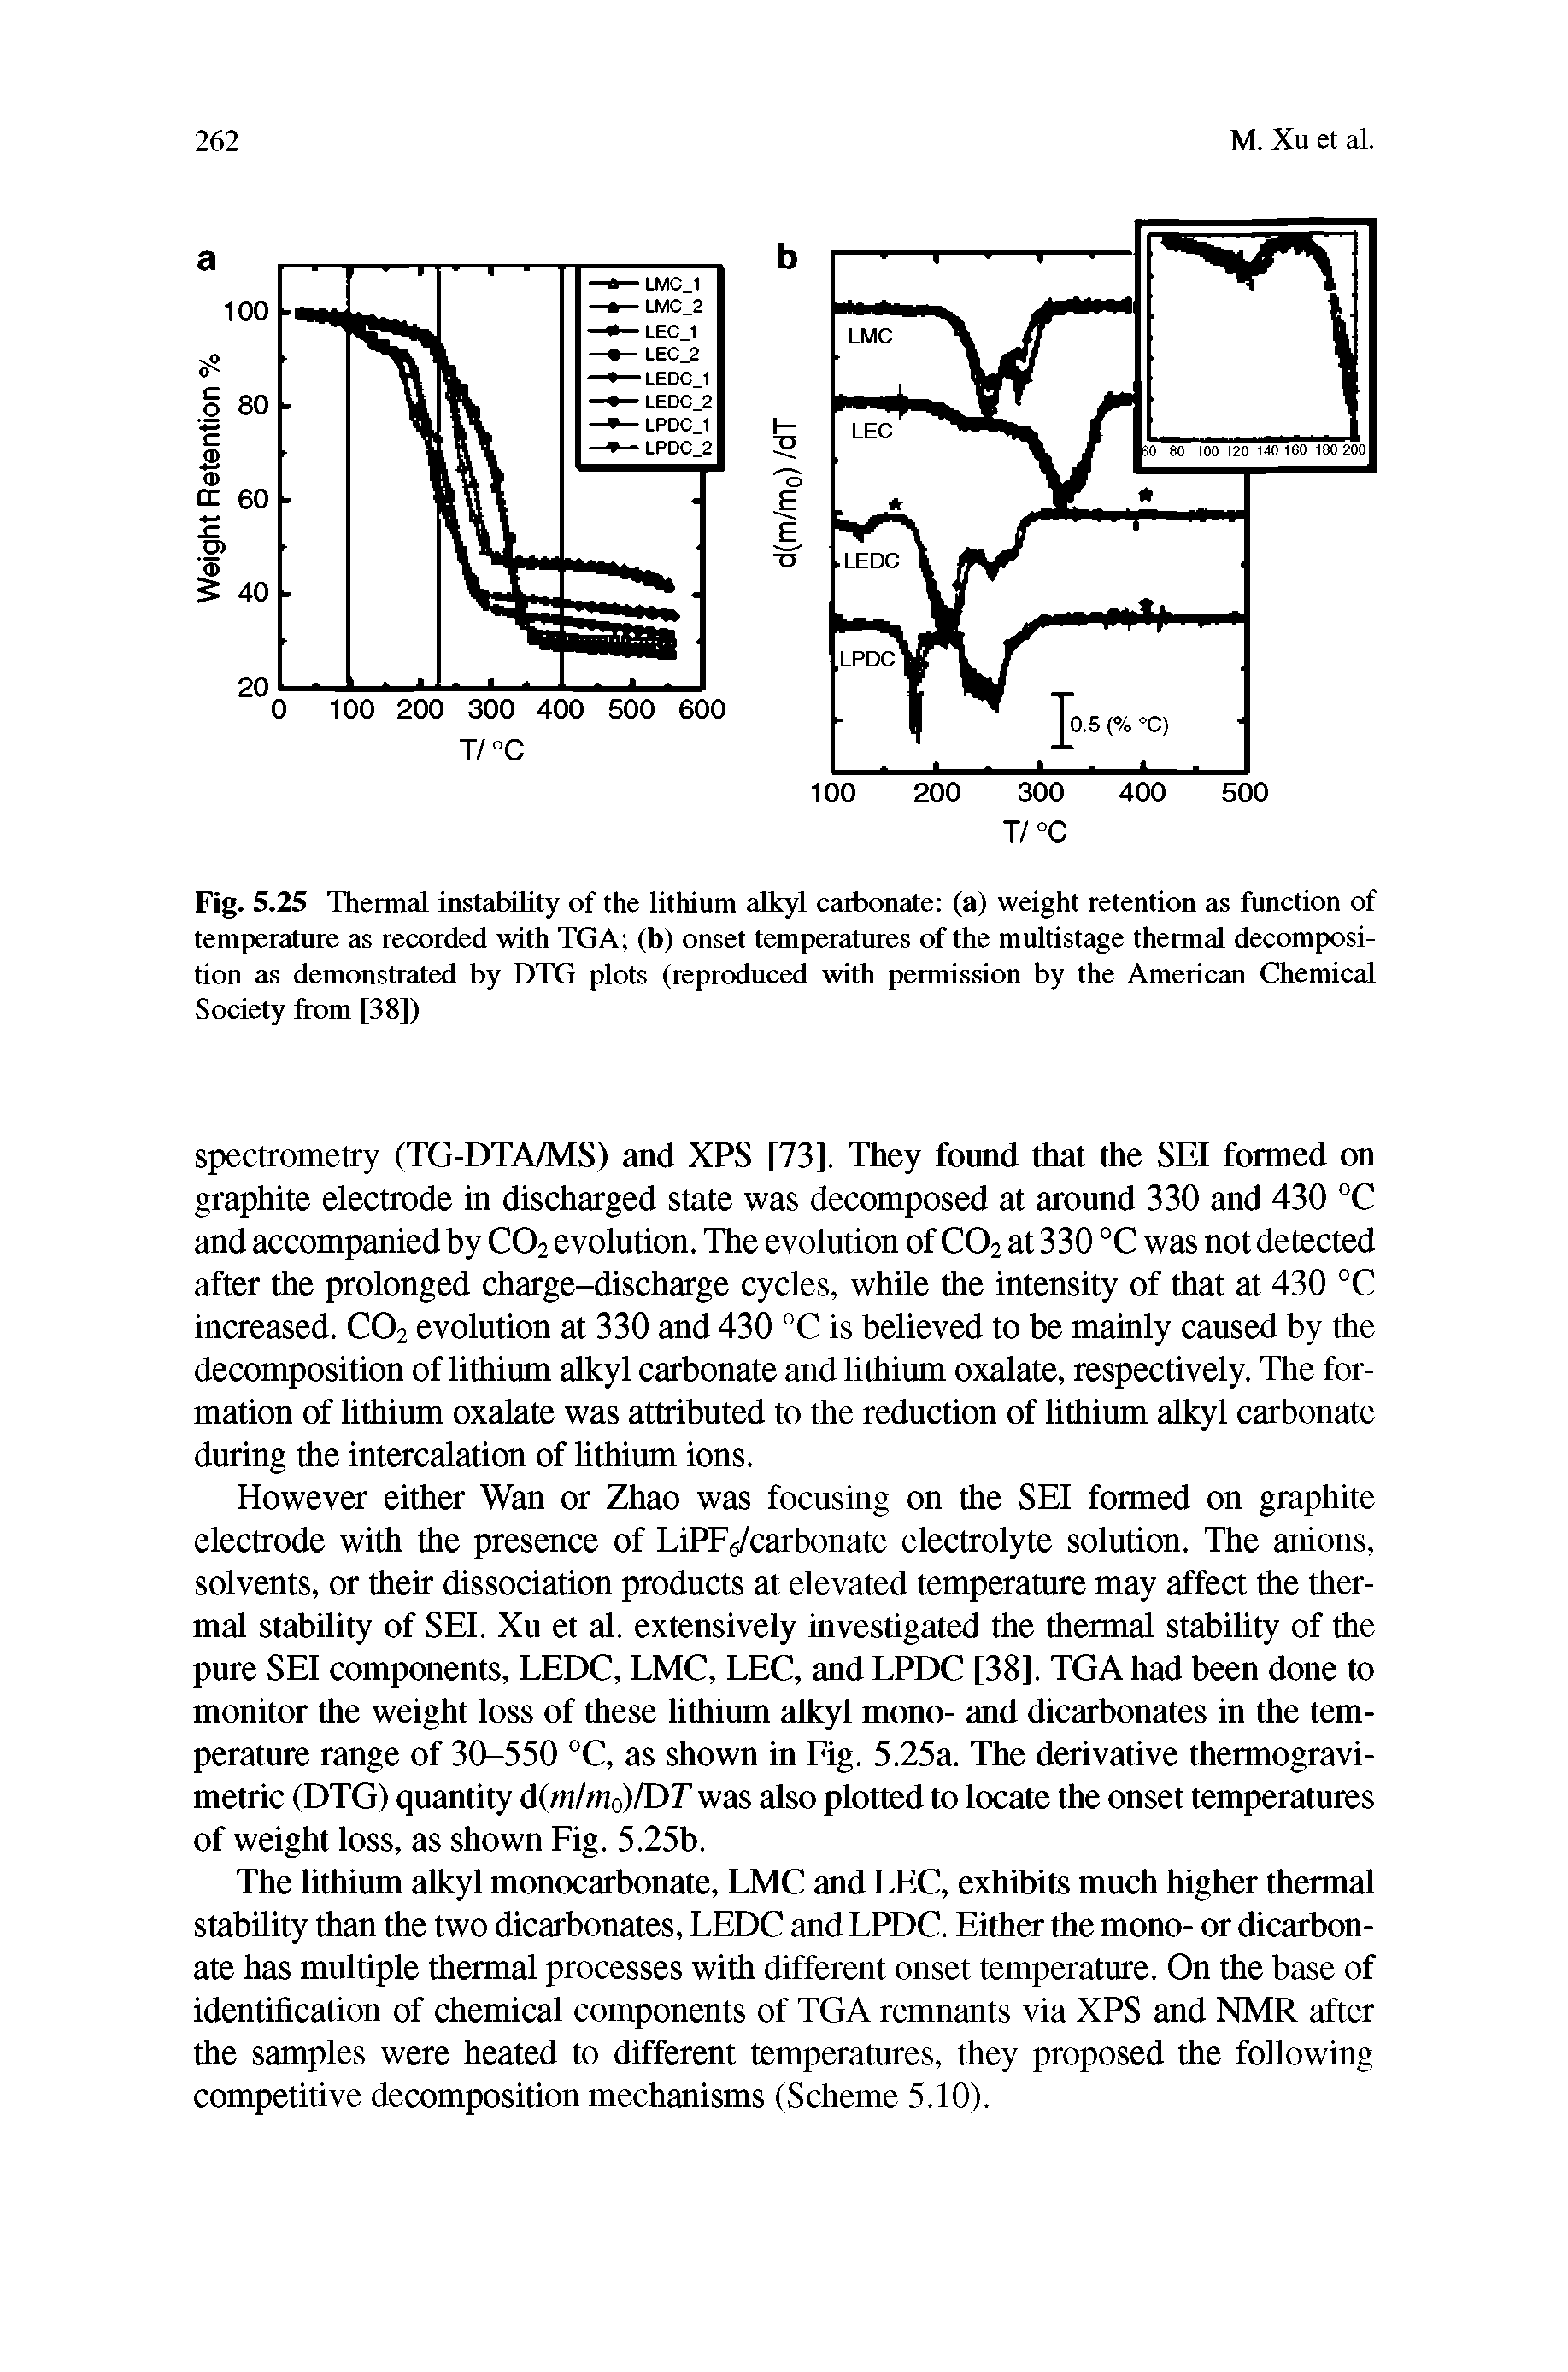 Fig. 5.25 Thermal instability of the lithium alkyl carbonate (a) weight retention as function of temperature as recorded with TGA (b) onset temperatures of the multistage thermal decomposition as demonstrated by DTG plots (reproduced with permission by the American Chemical Society from [38])...